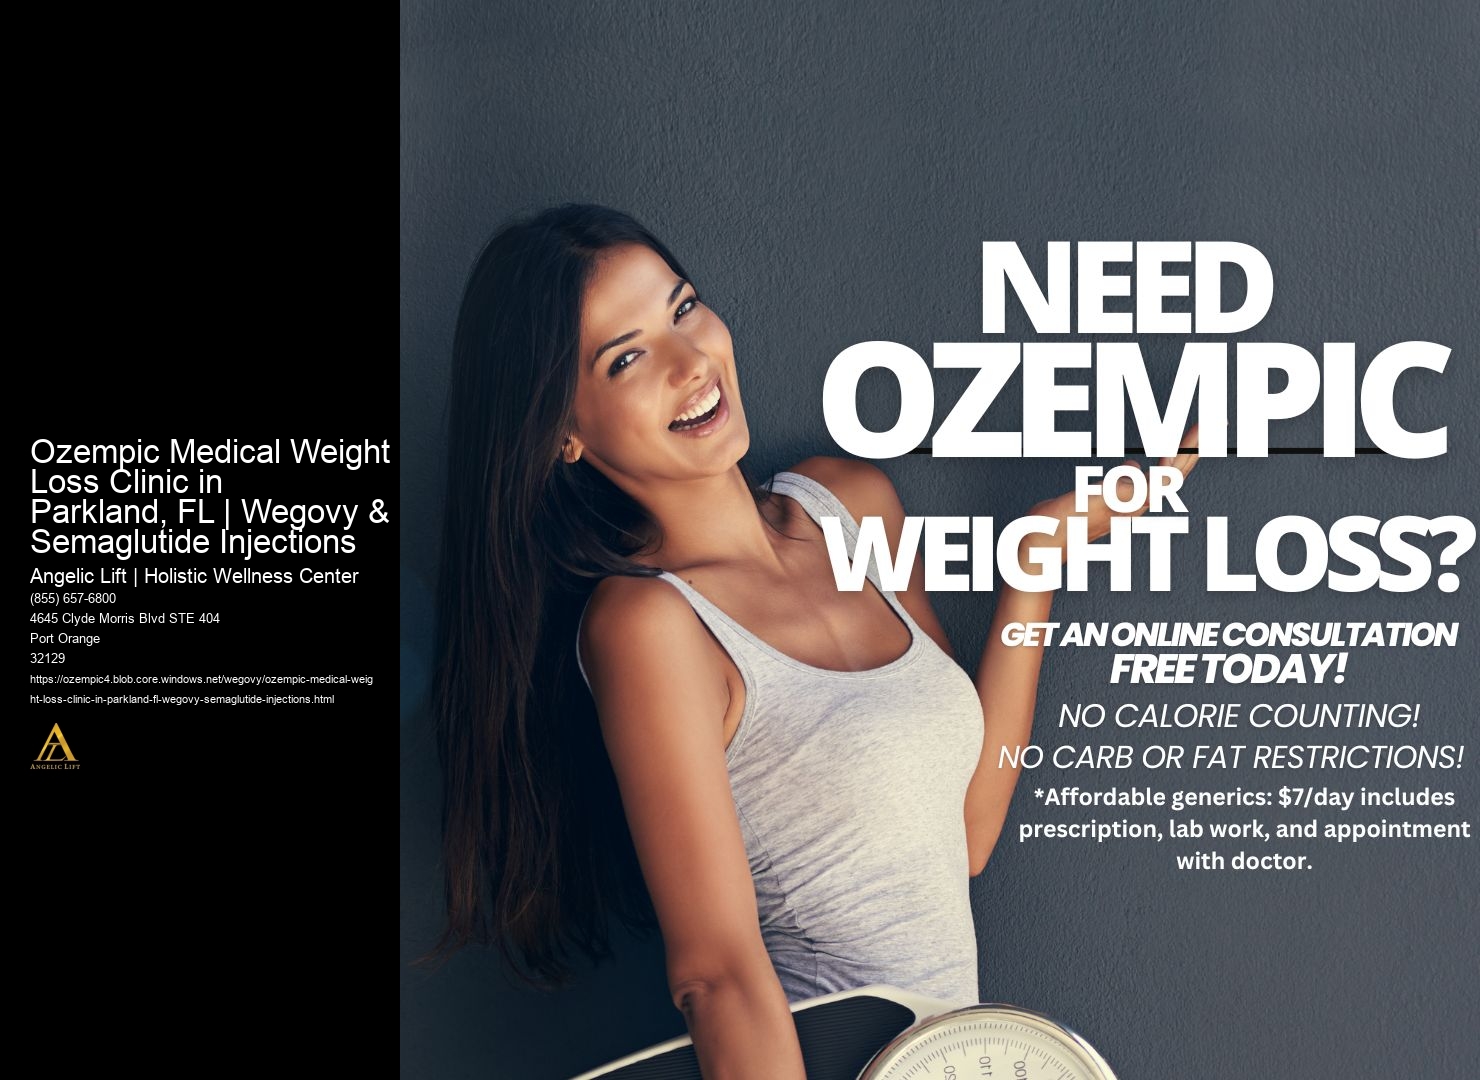 Ozempic Medical Weight Loss Clinic in Parkland, FL | Wegovy & Semaglutide Injections